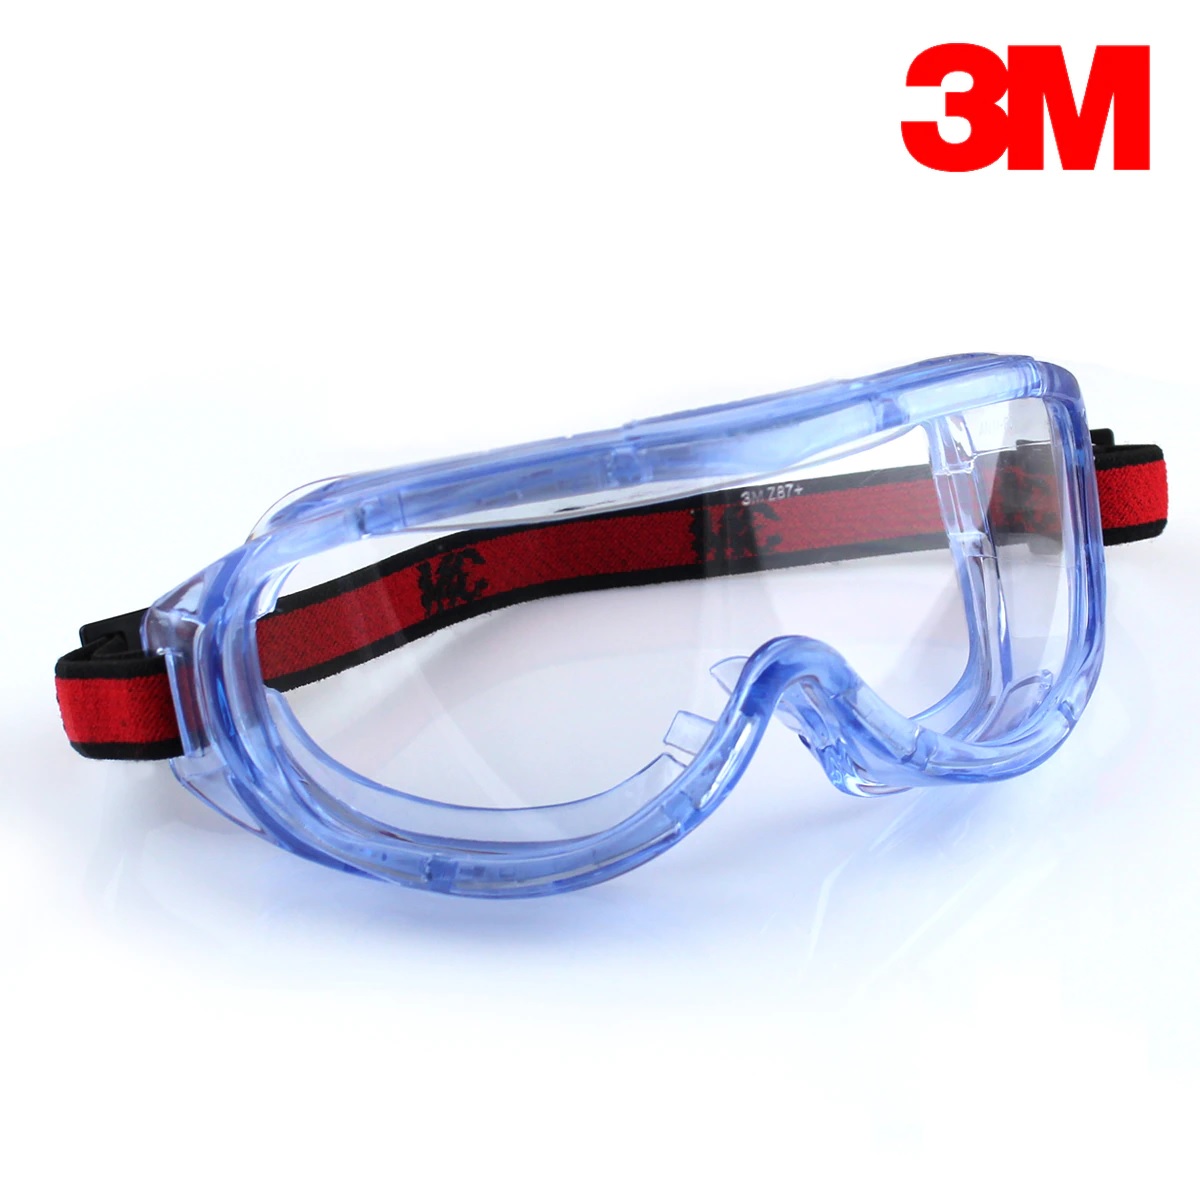 SAFETY GOGGLES, BLUE FRAME, ANTI-FOG CLEAR LENS - Goggles